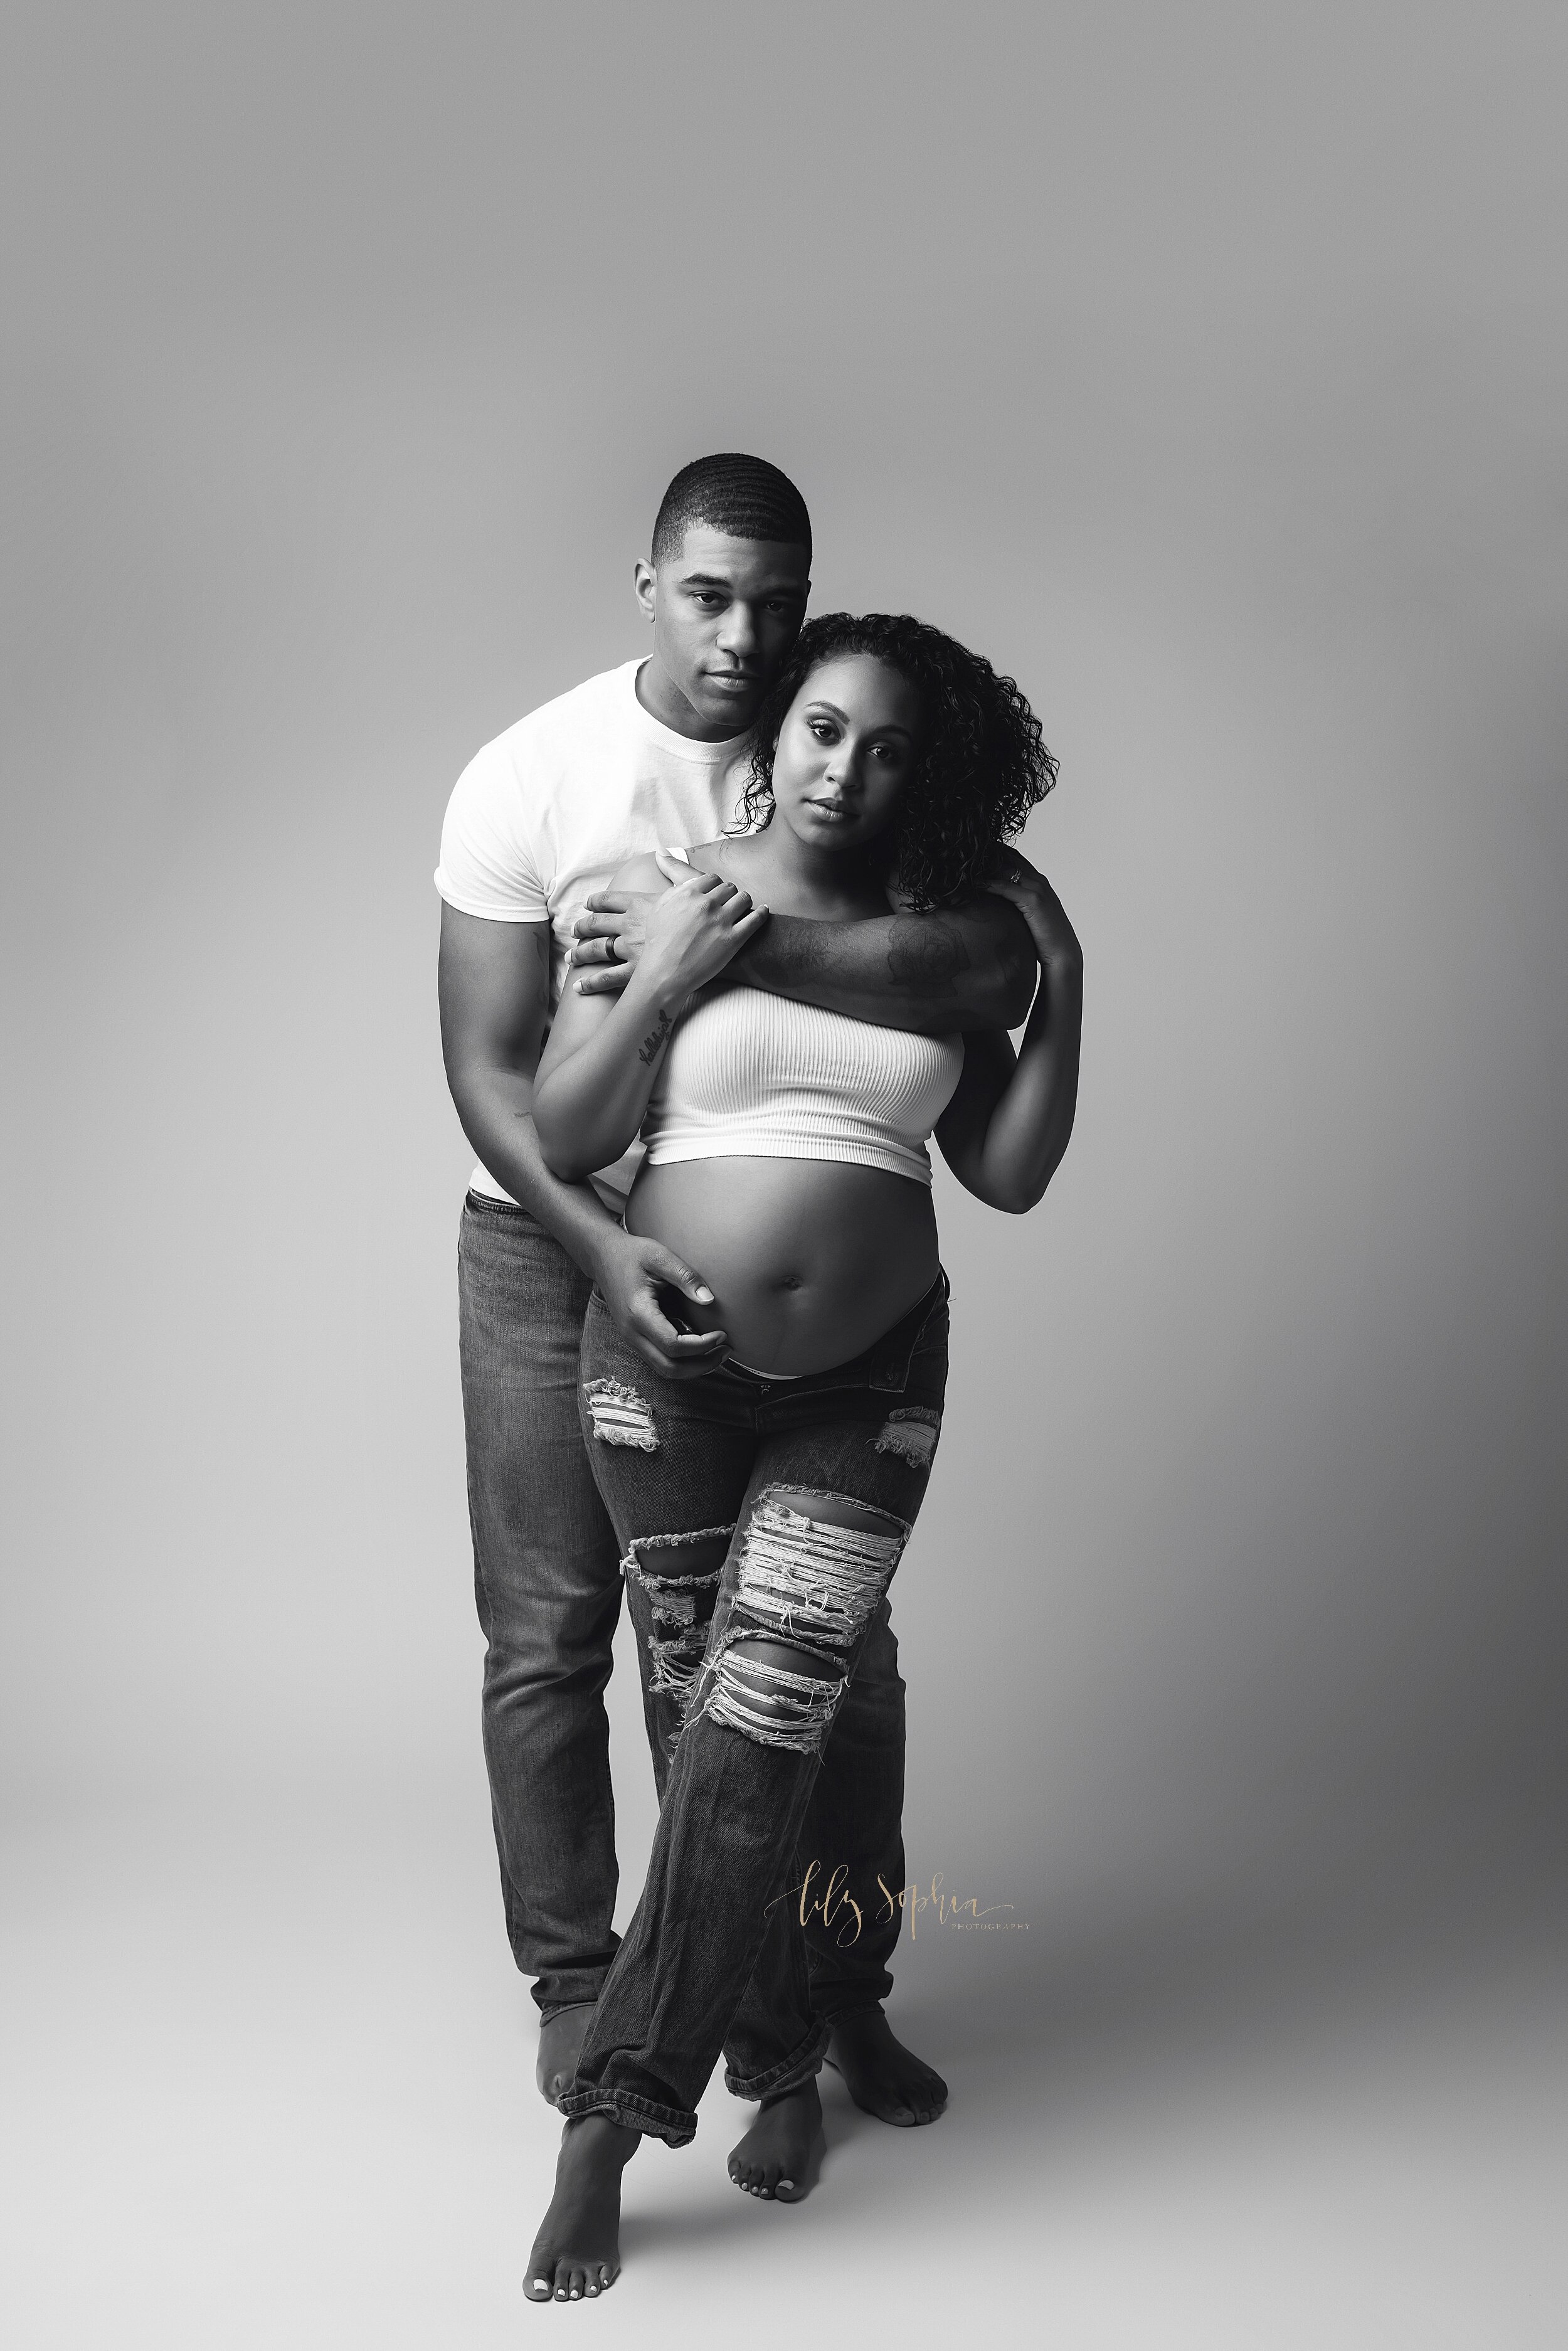  Black and white maternity image of an expectant African American couple embracing while wearing jeans and white tops.  